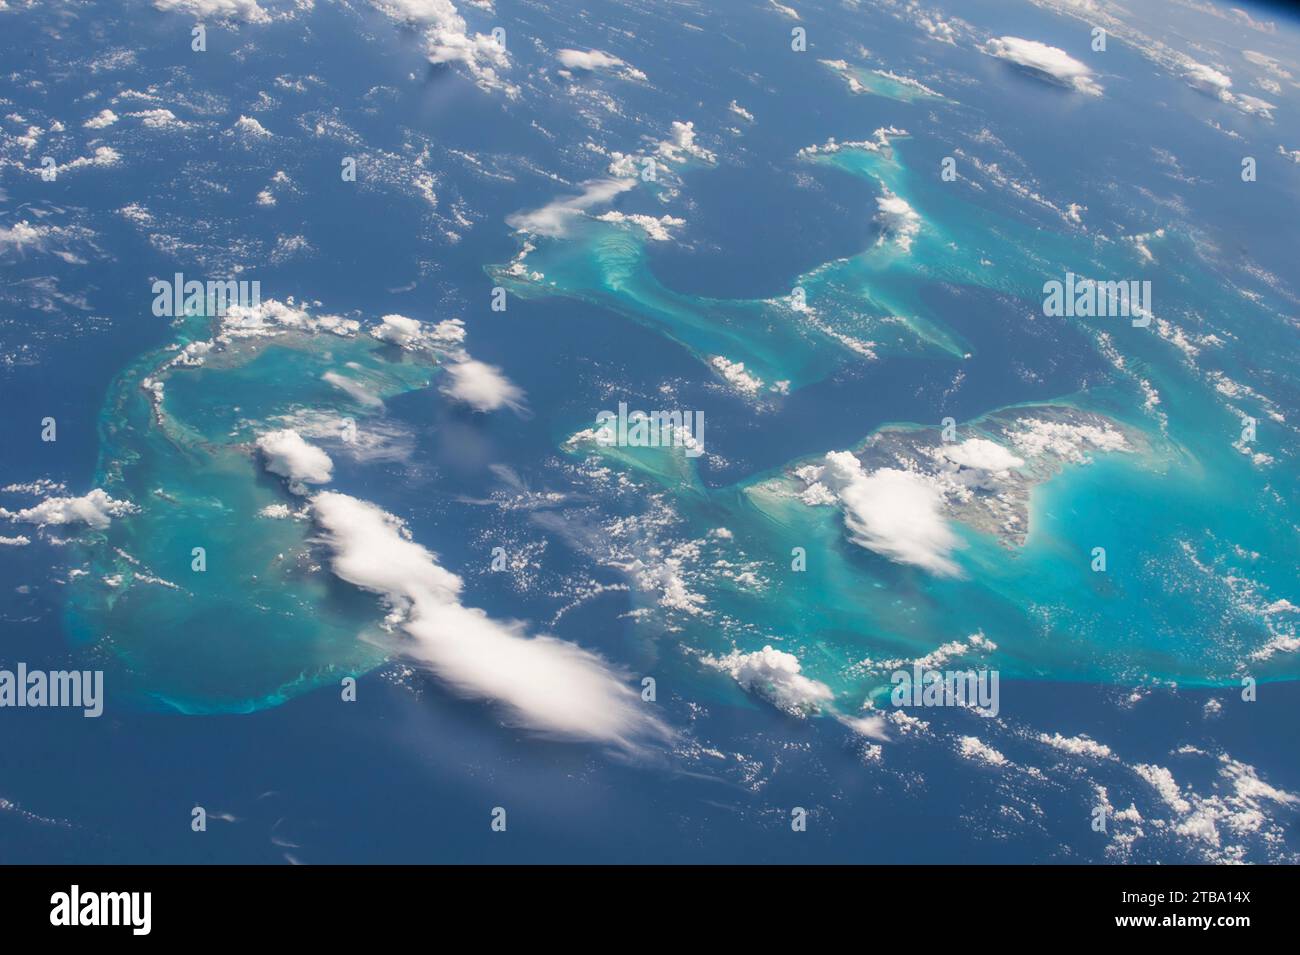 View from space of the Bahamas. Stock Photo